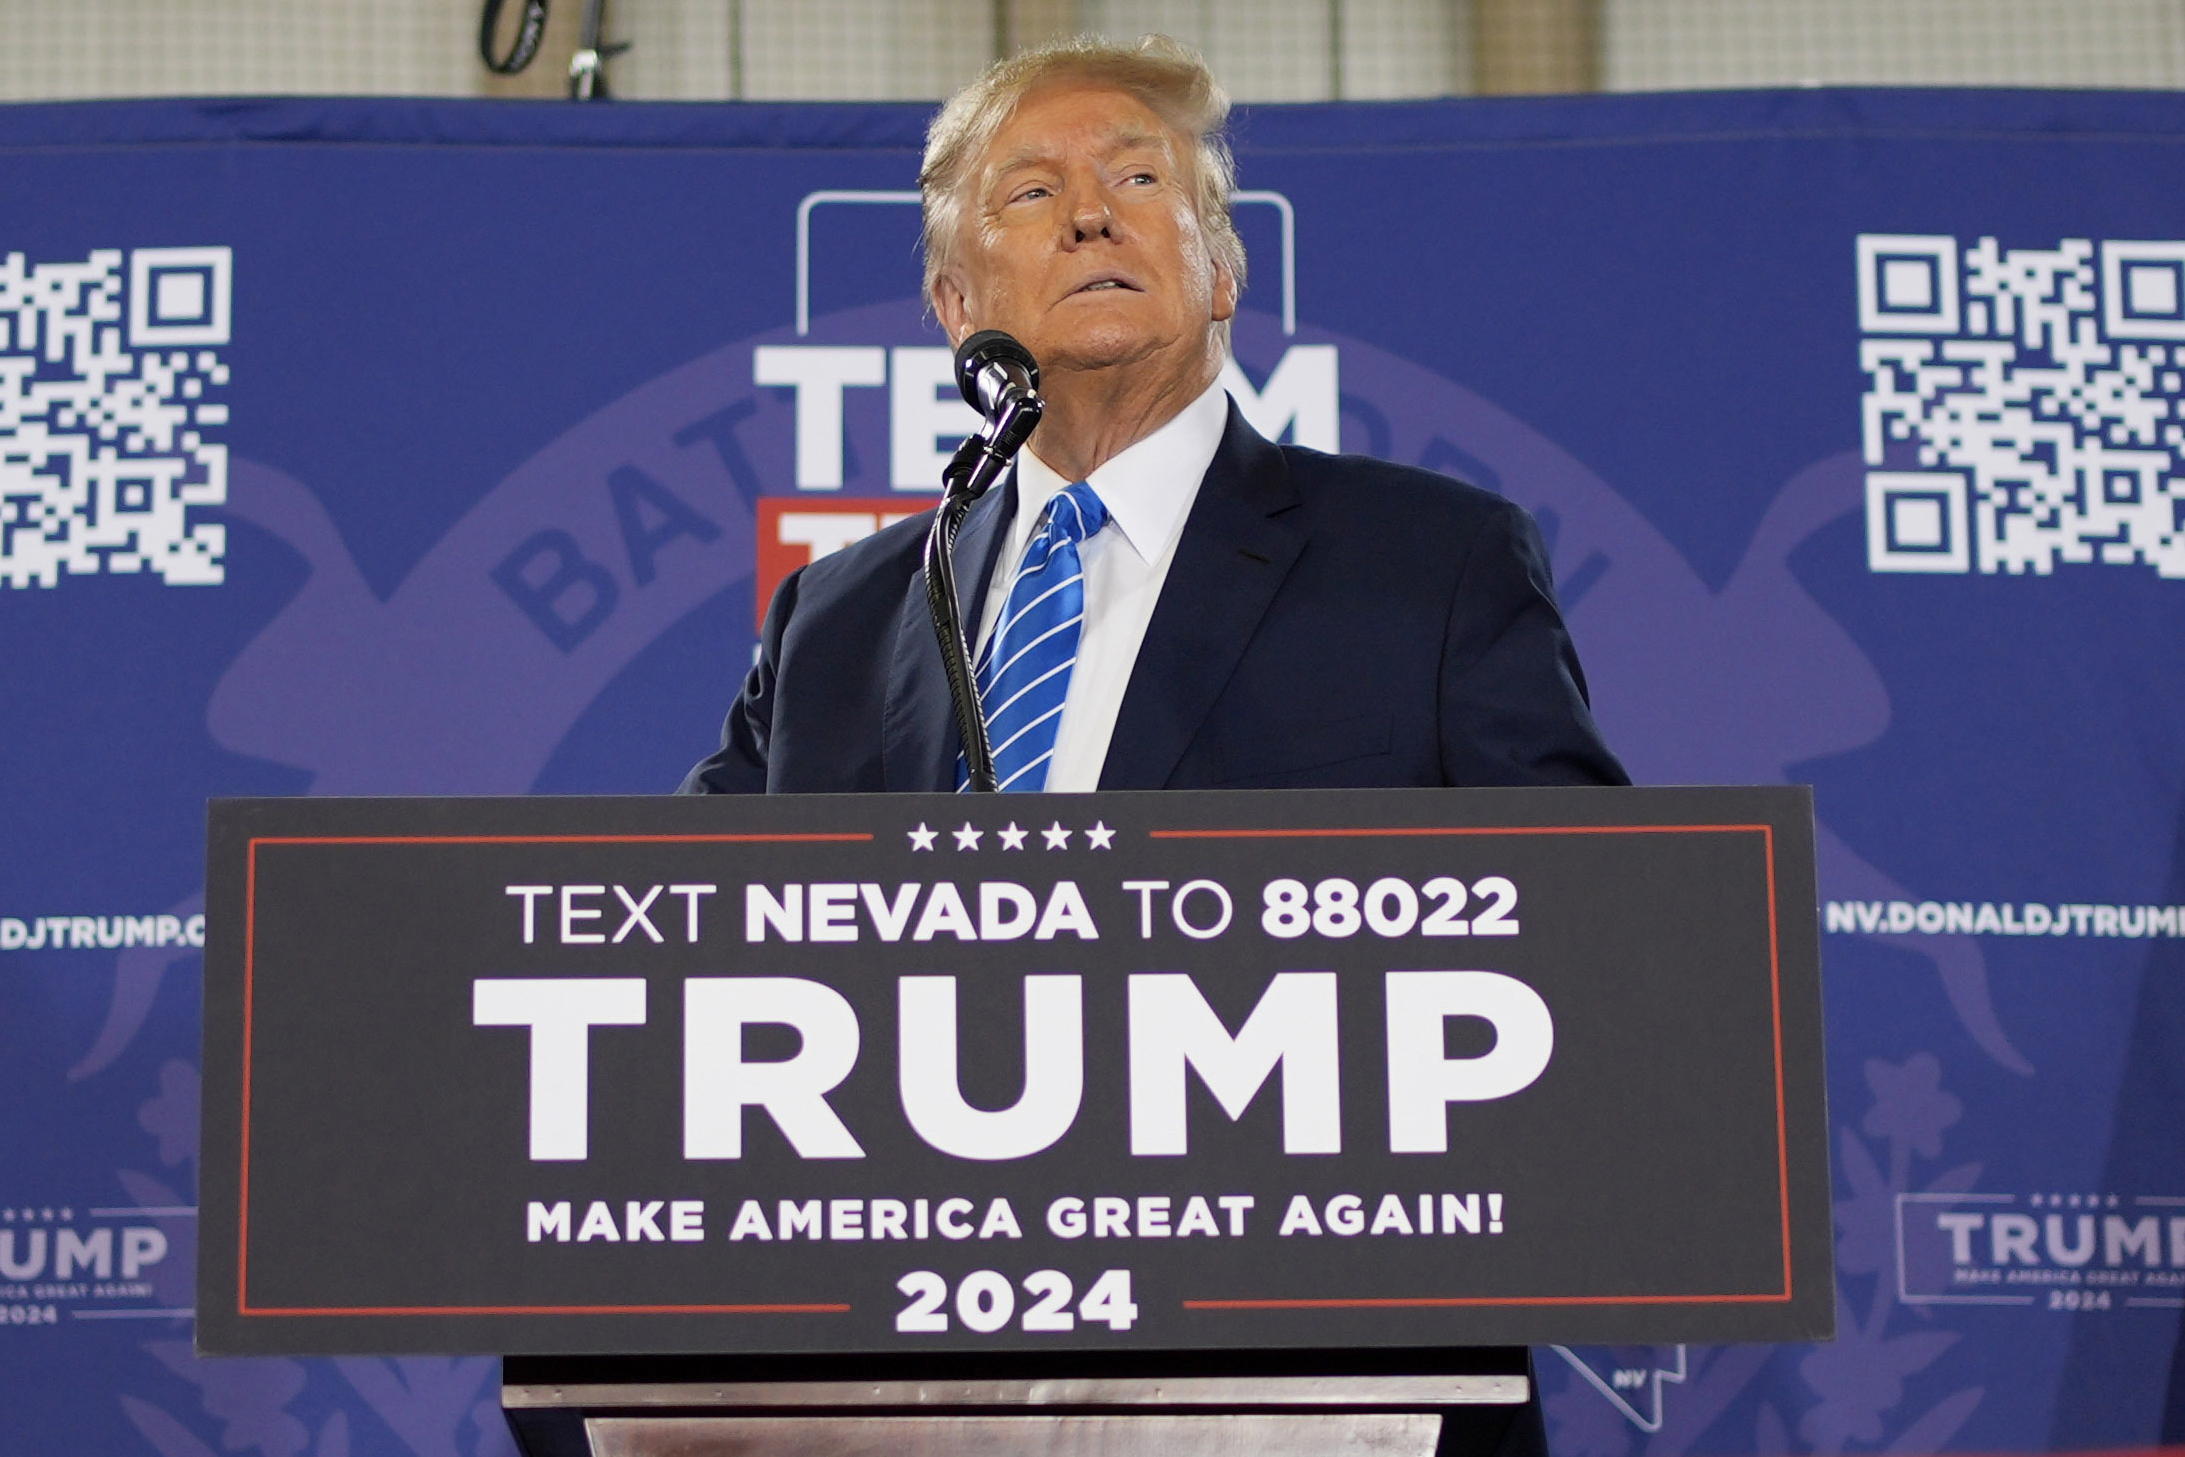 Former president Donald Trump speaks at a campaign event on January 27 in Las Vegas.